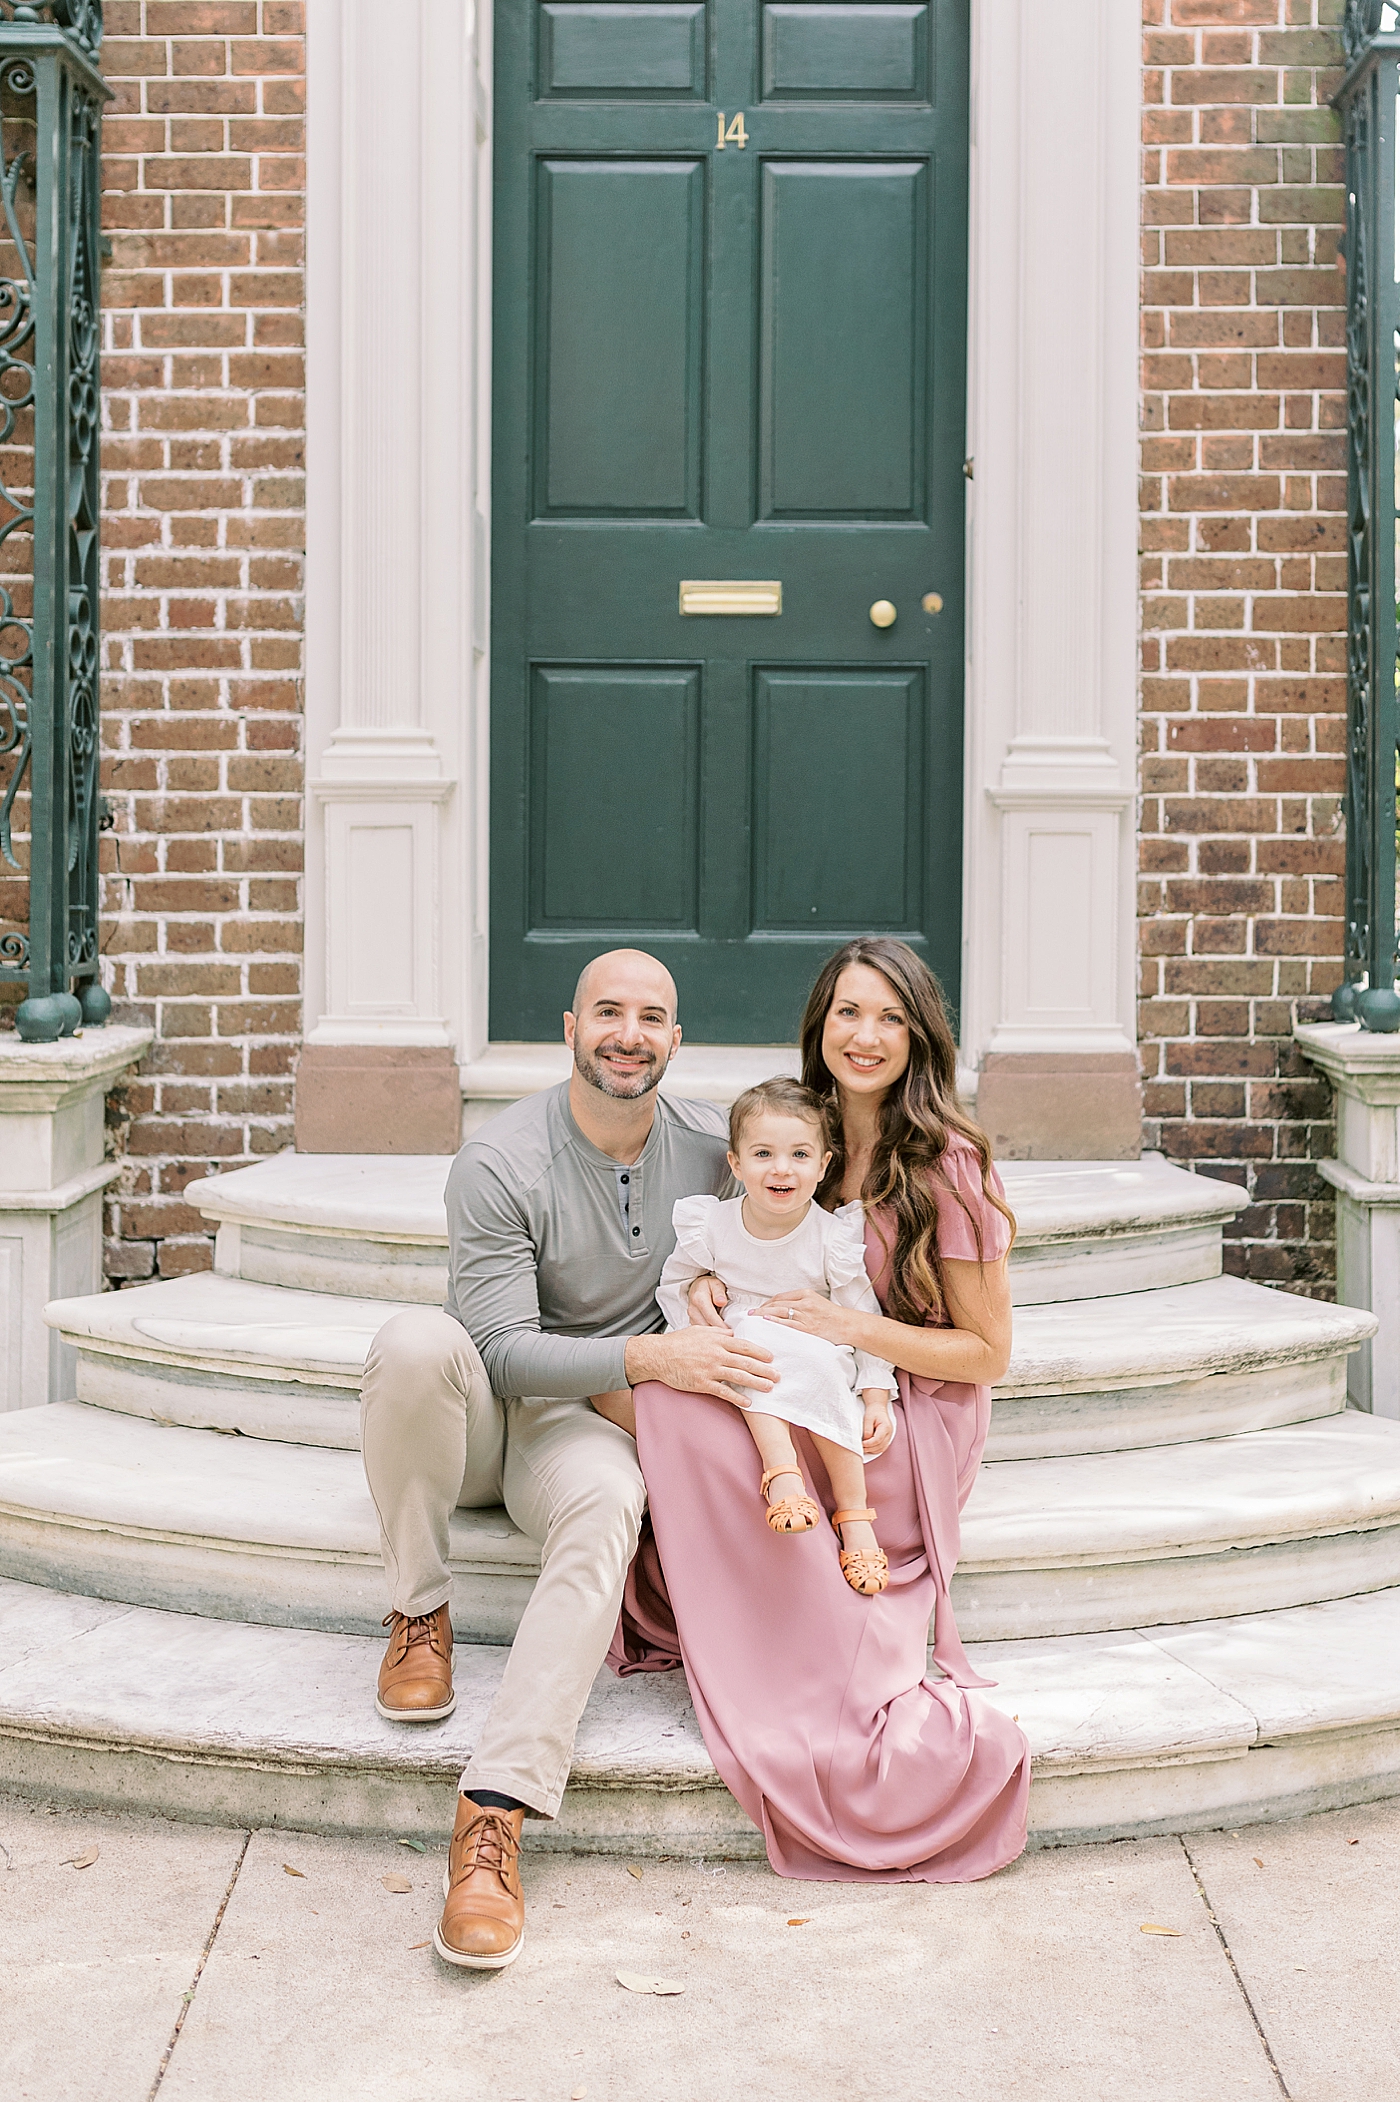 Couple sitting with their little girl on steps | Photo by Caitlyn Motycka Photography